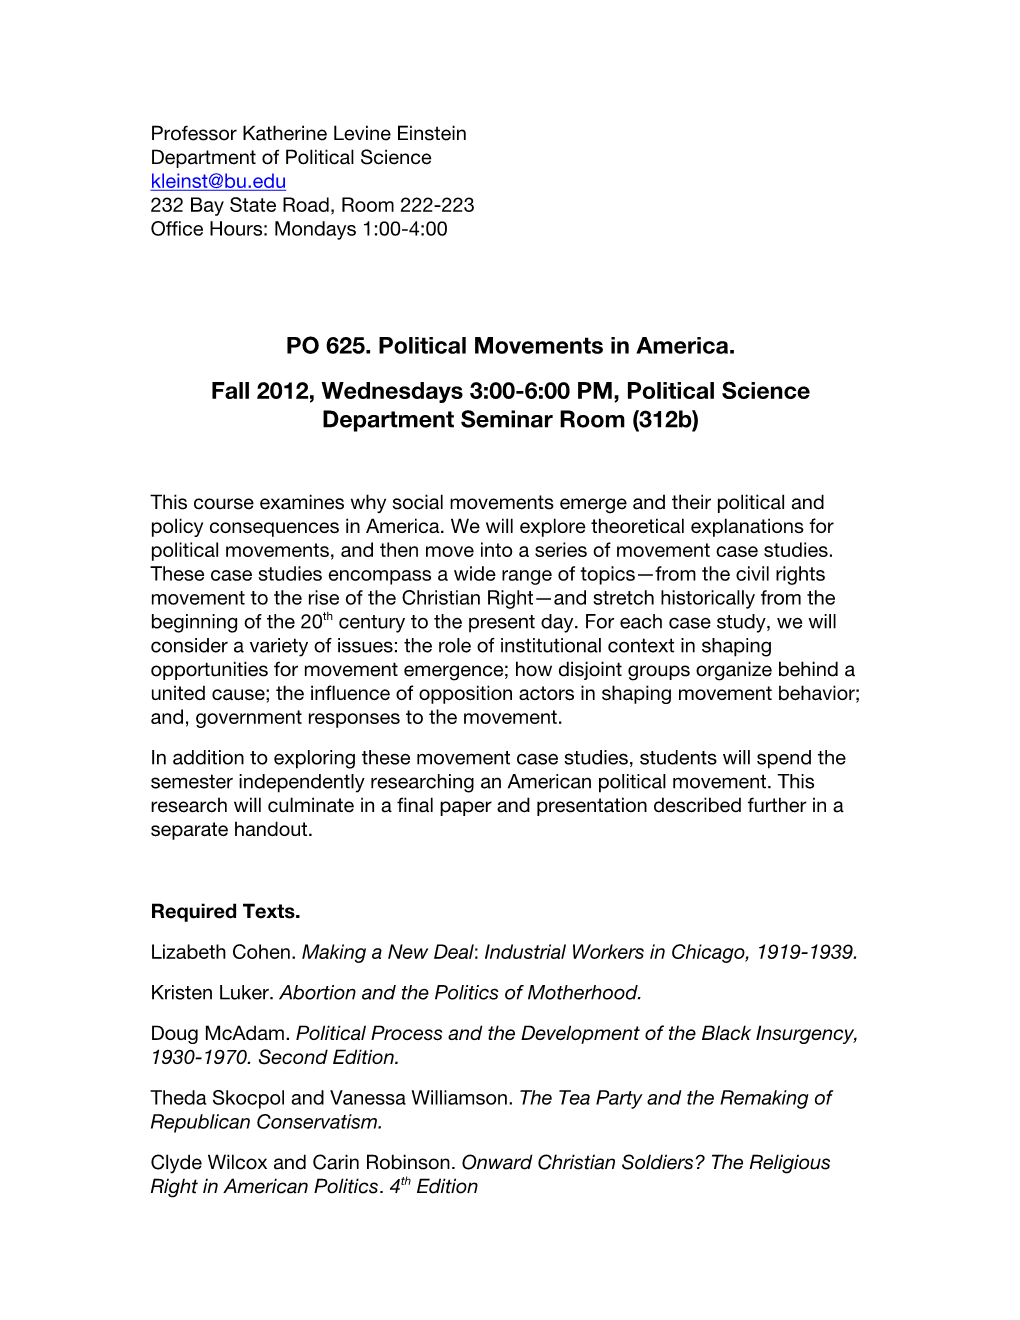 PO 625. Political Movements in America. Fall 2012, Wednesdays 3:00-6:00 PM, Political Science Department Seminar Room (312B)